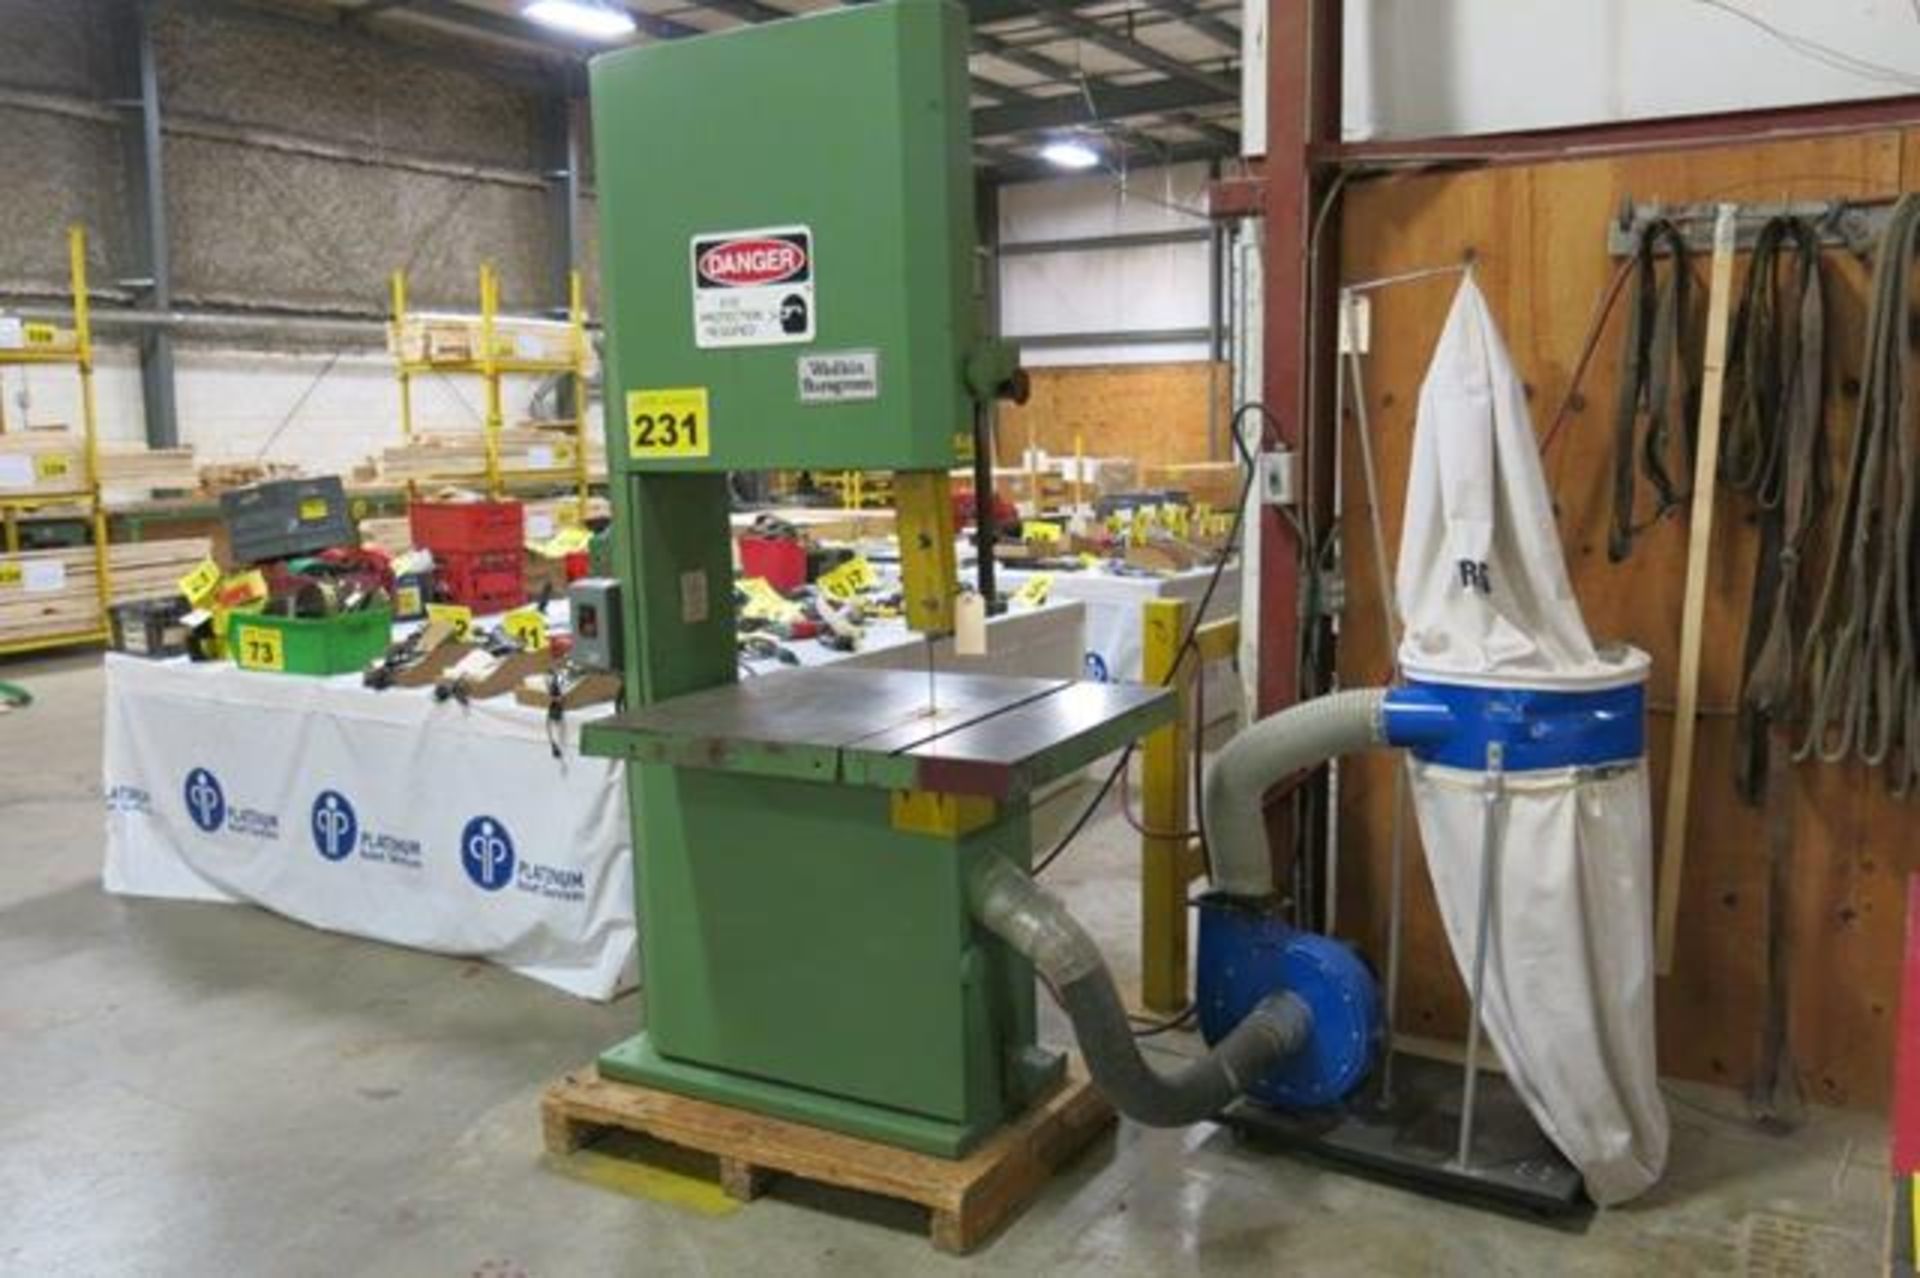 WADKIN BURSGREEN, C7, VERTICAL BAND SAW WITH DUST COLLECTOR (RIGGING - $125) - Image 2 of 6